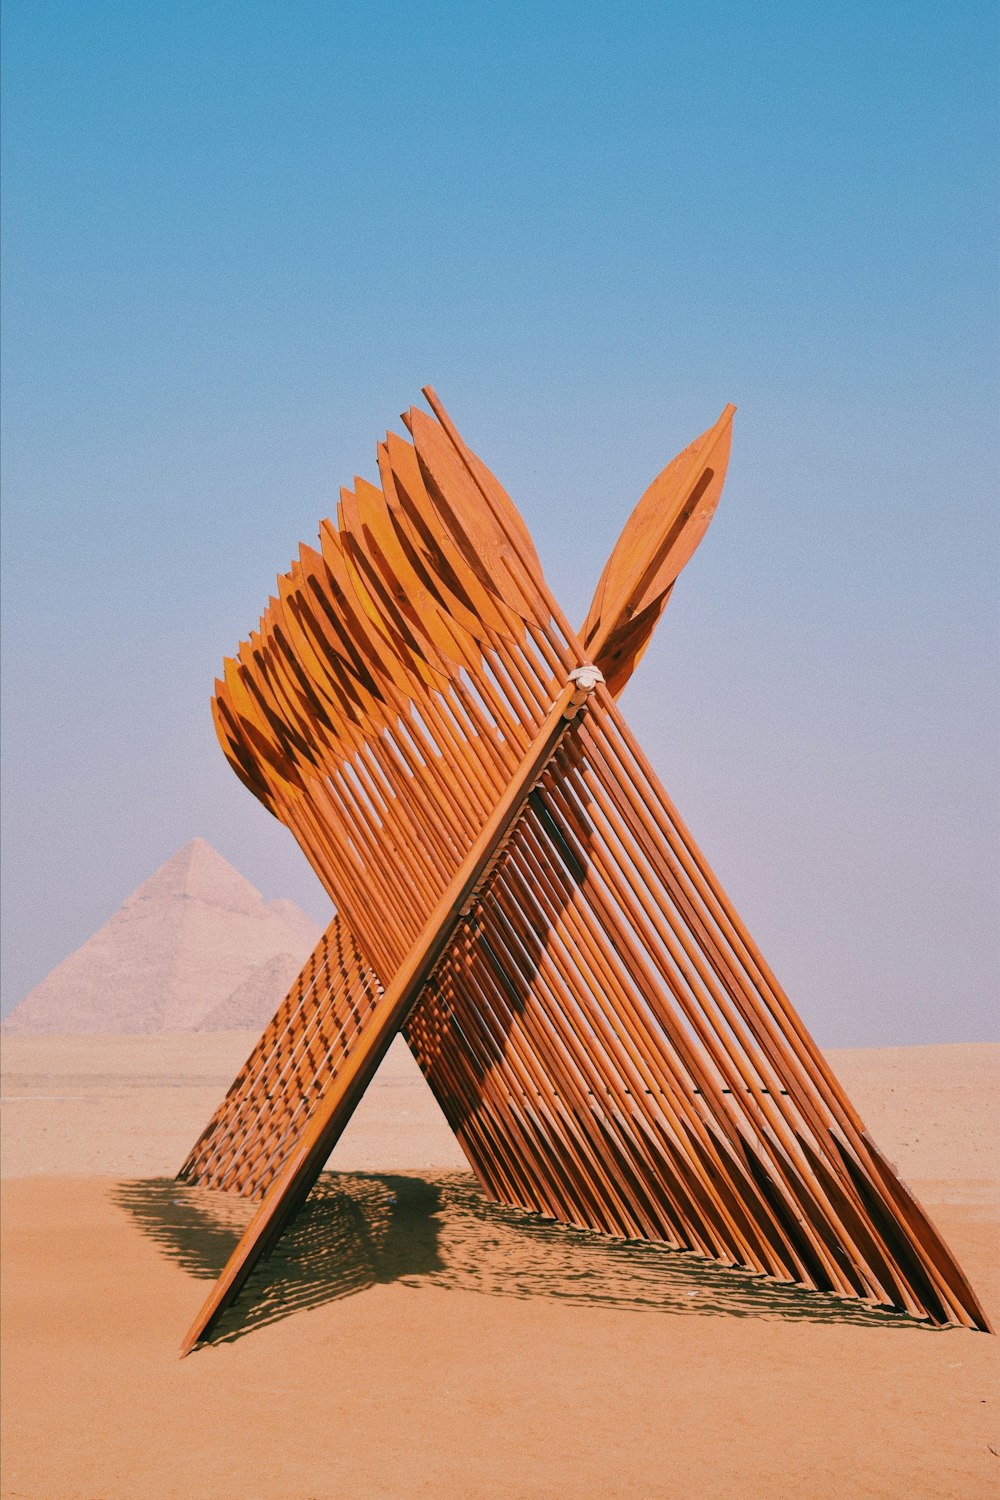 a large wooden sculpture sitting in the middle of a desert